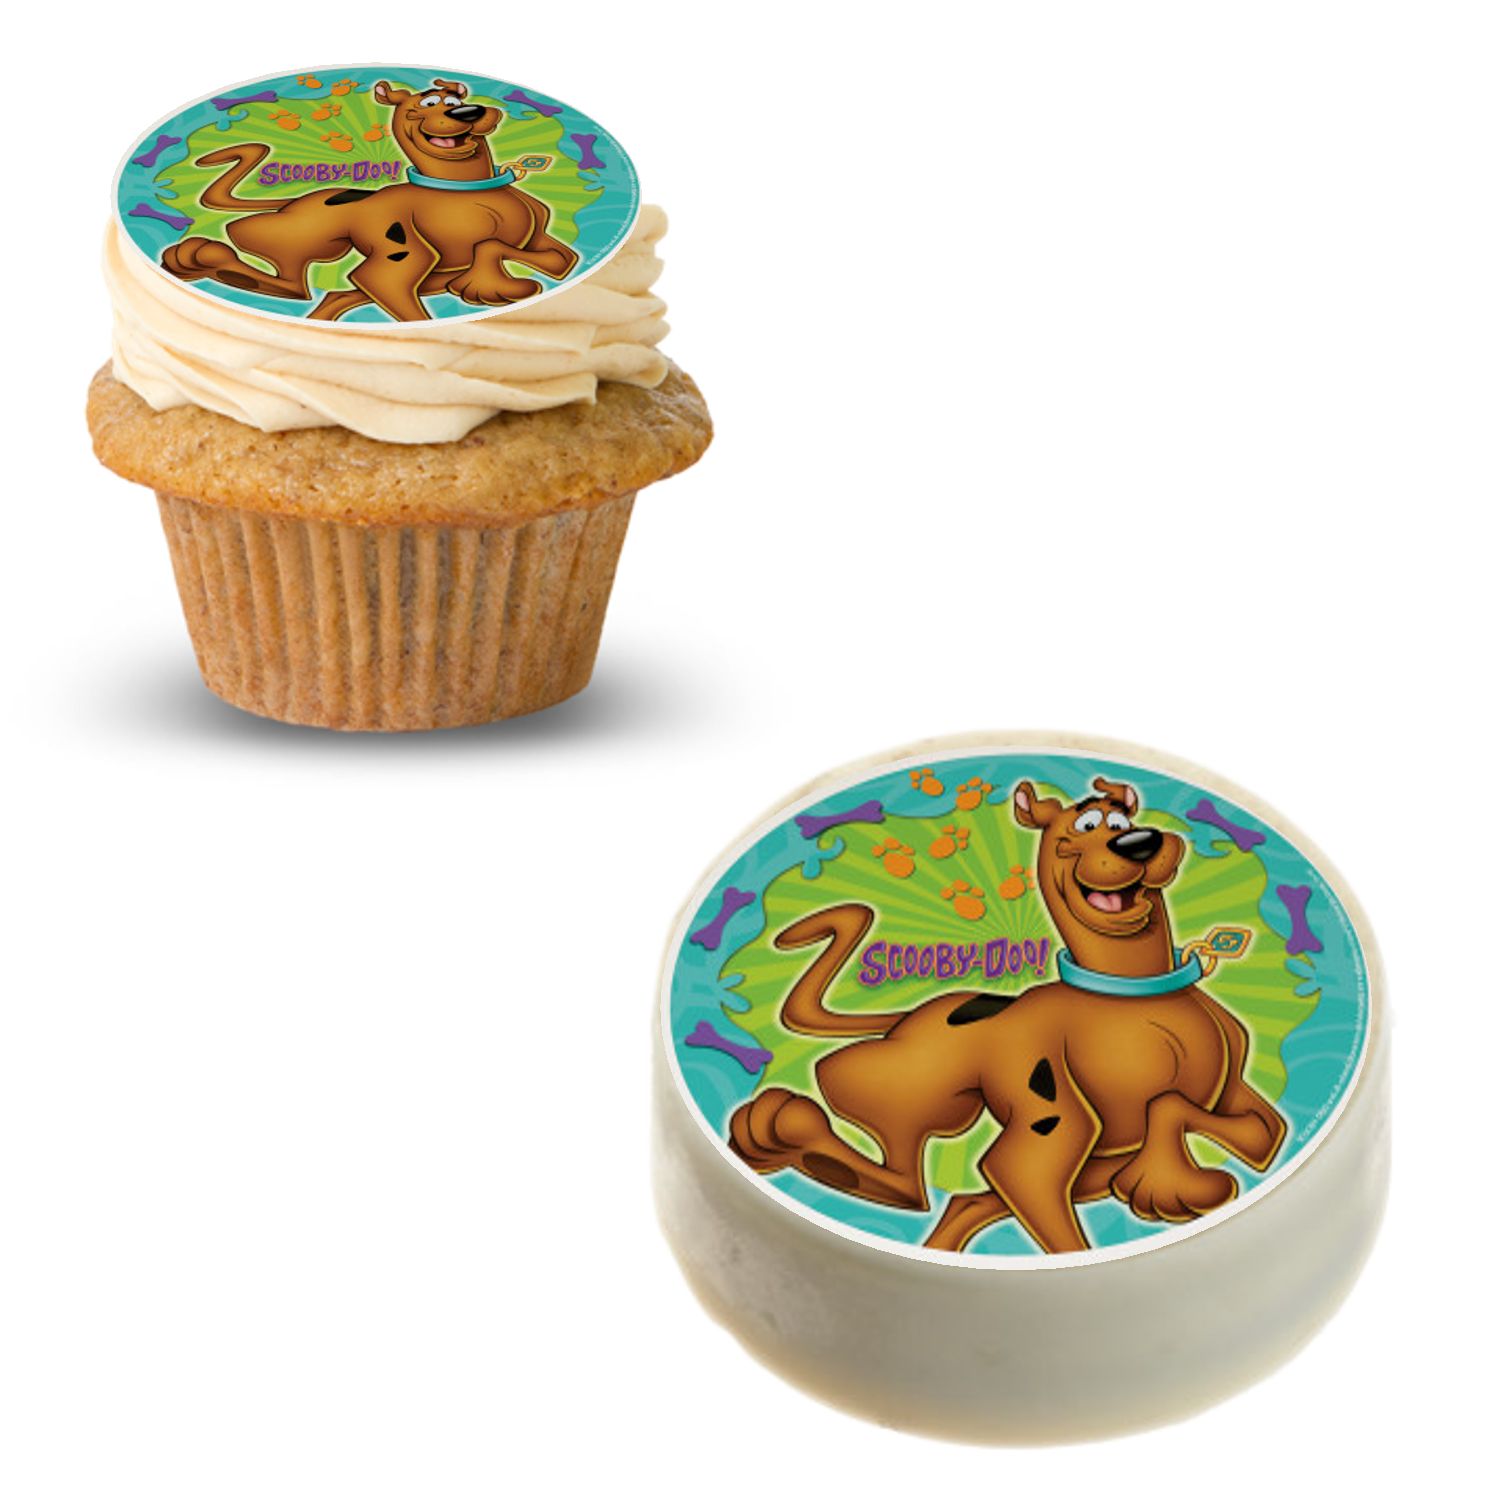 30 x Scooby Doo Party Collection Edible Rice Wafer Paper Cupcake Toppers 